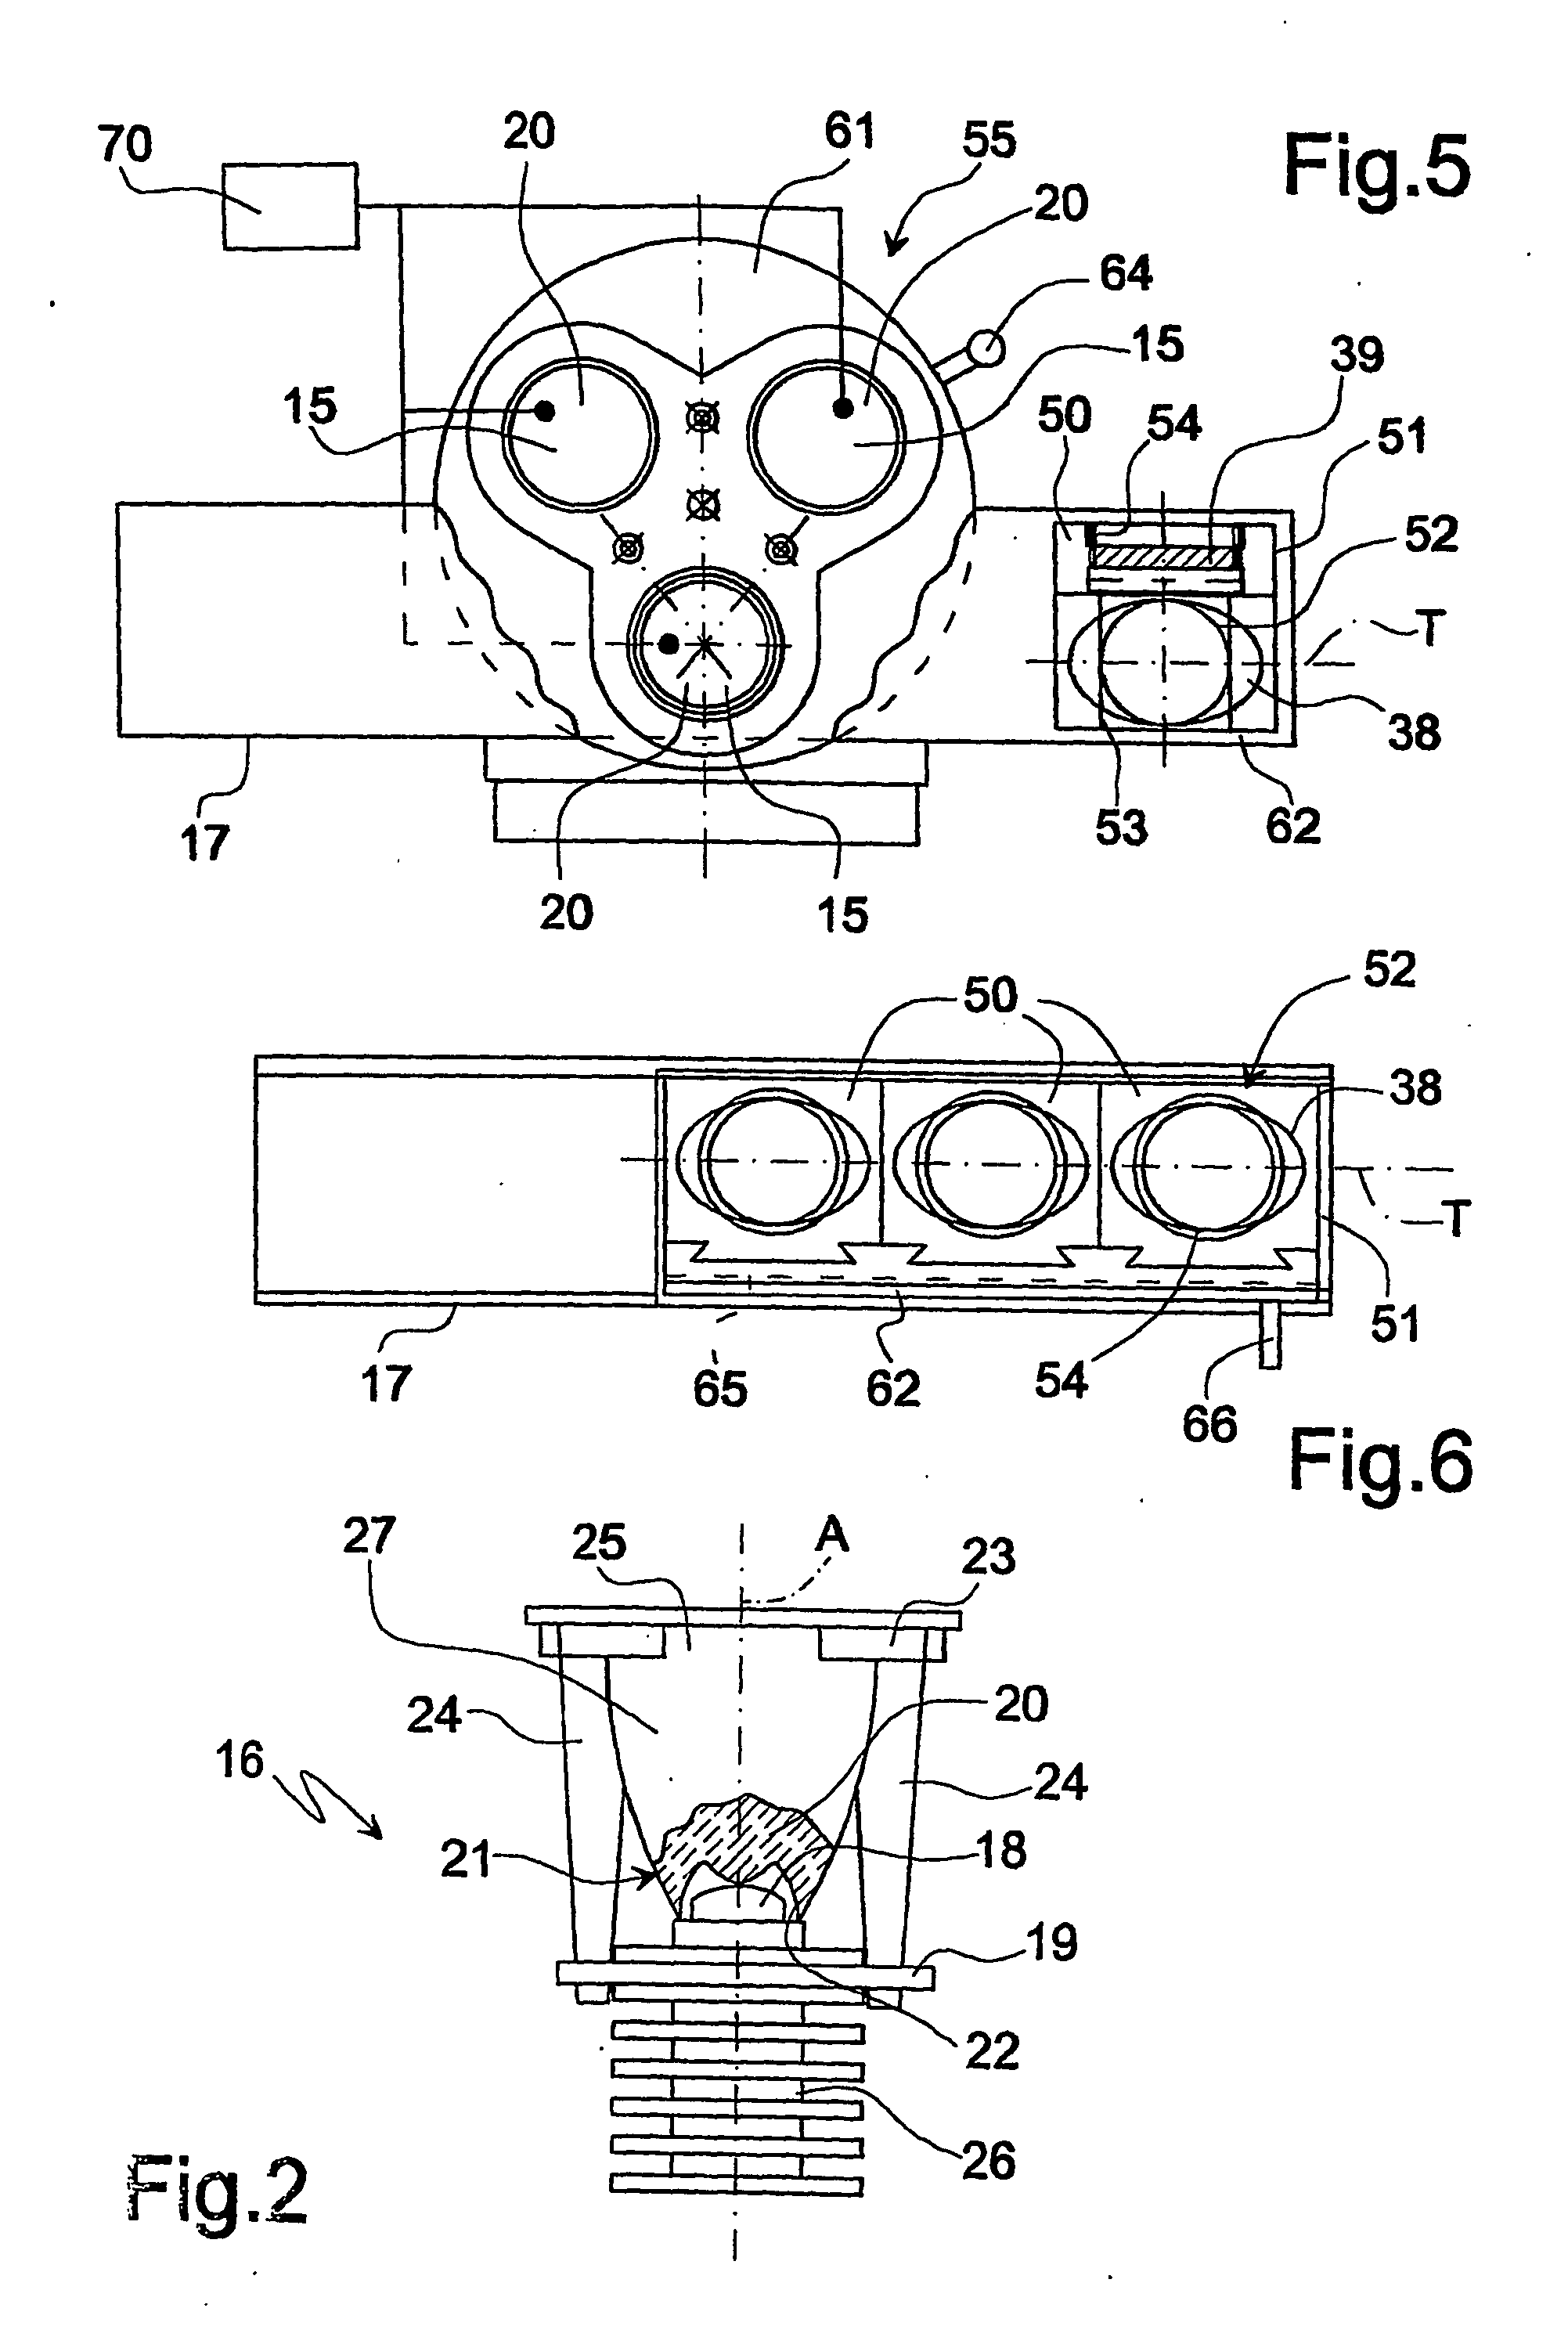 Lighting assembly for a luminescence analysis apparatus, in particular a fluorescence mrcroscope, and luminescence analysis apparatus equipped with such a lighting assembly